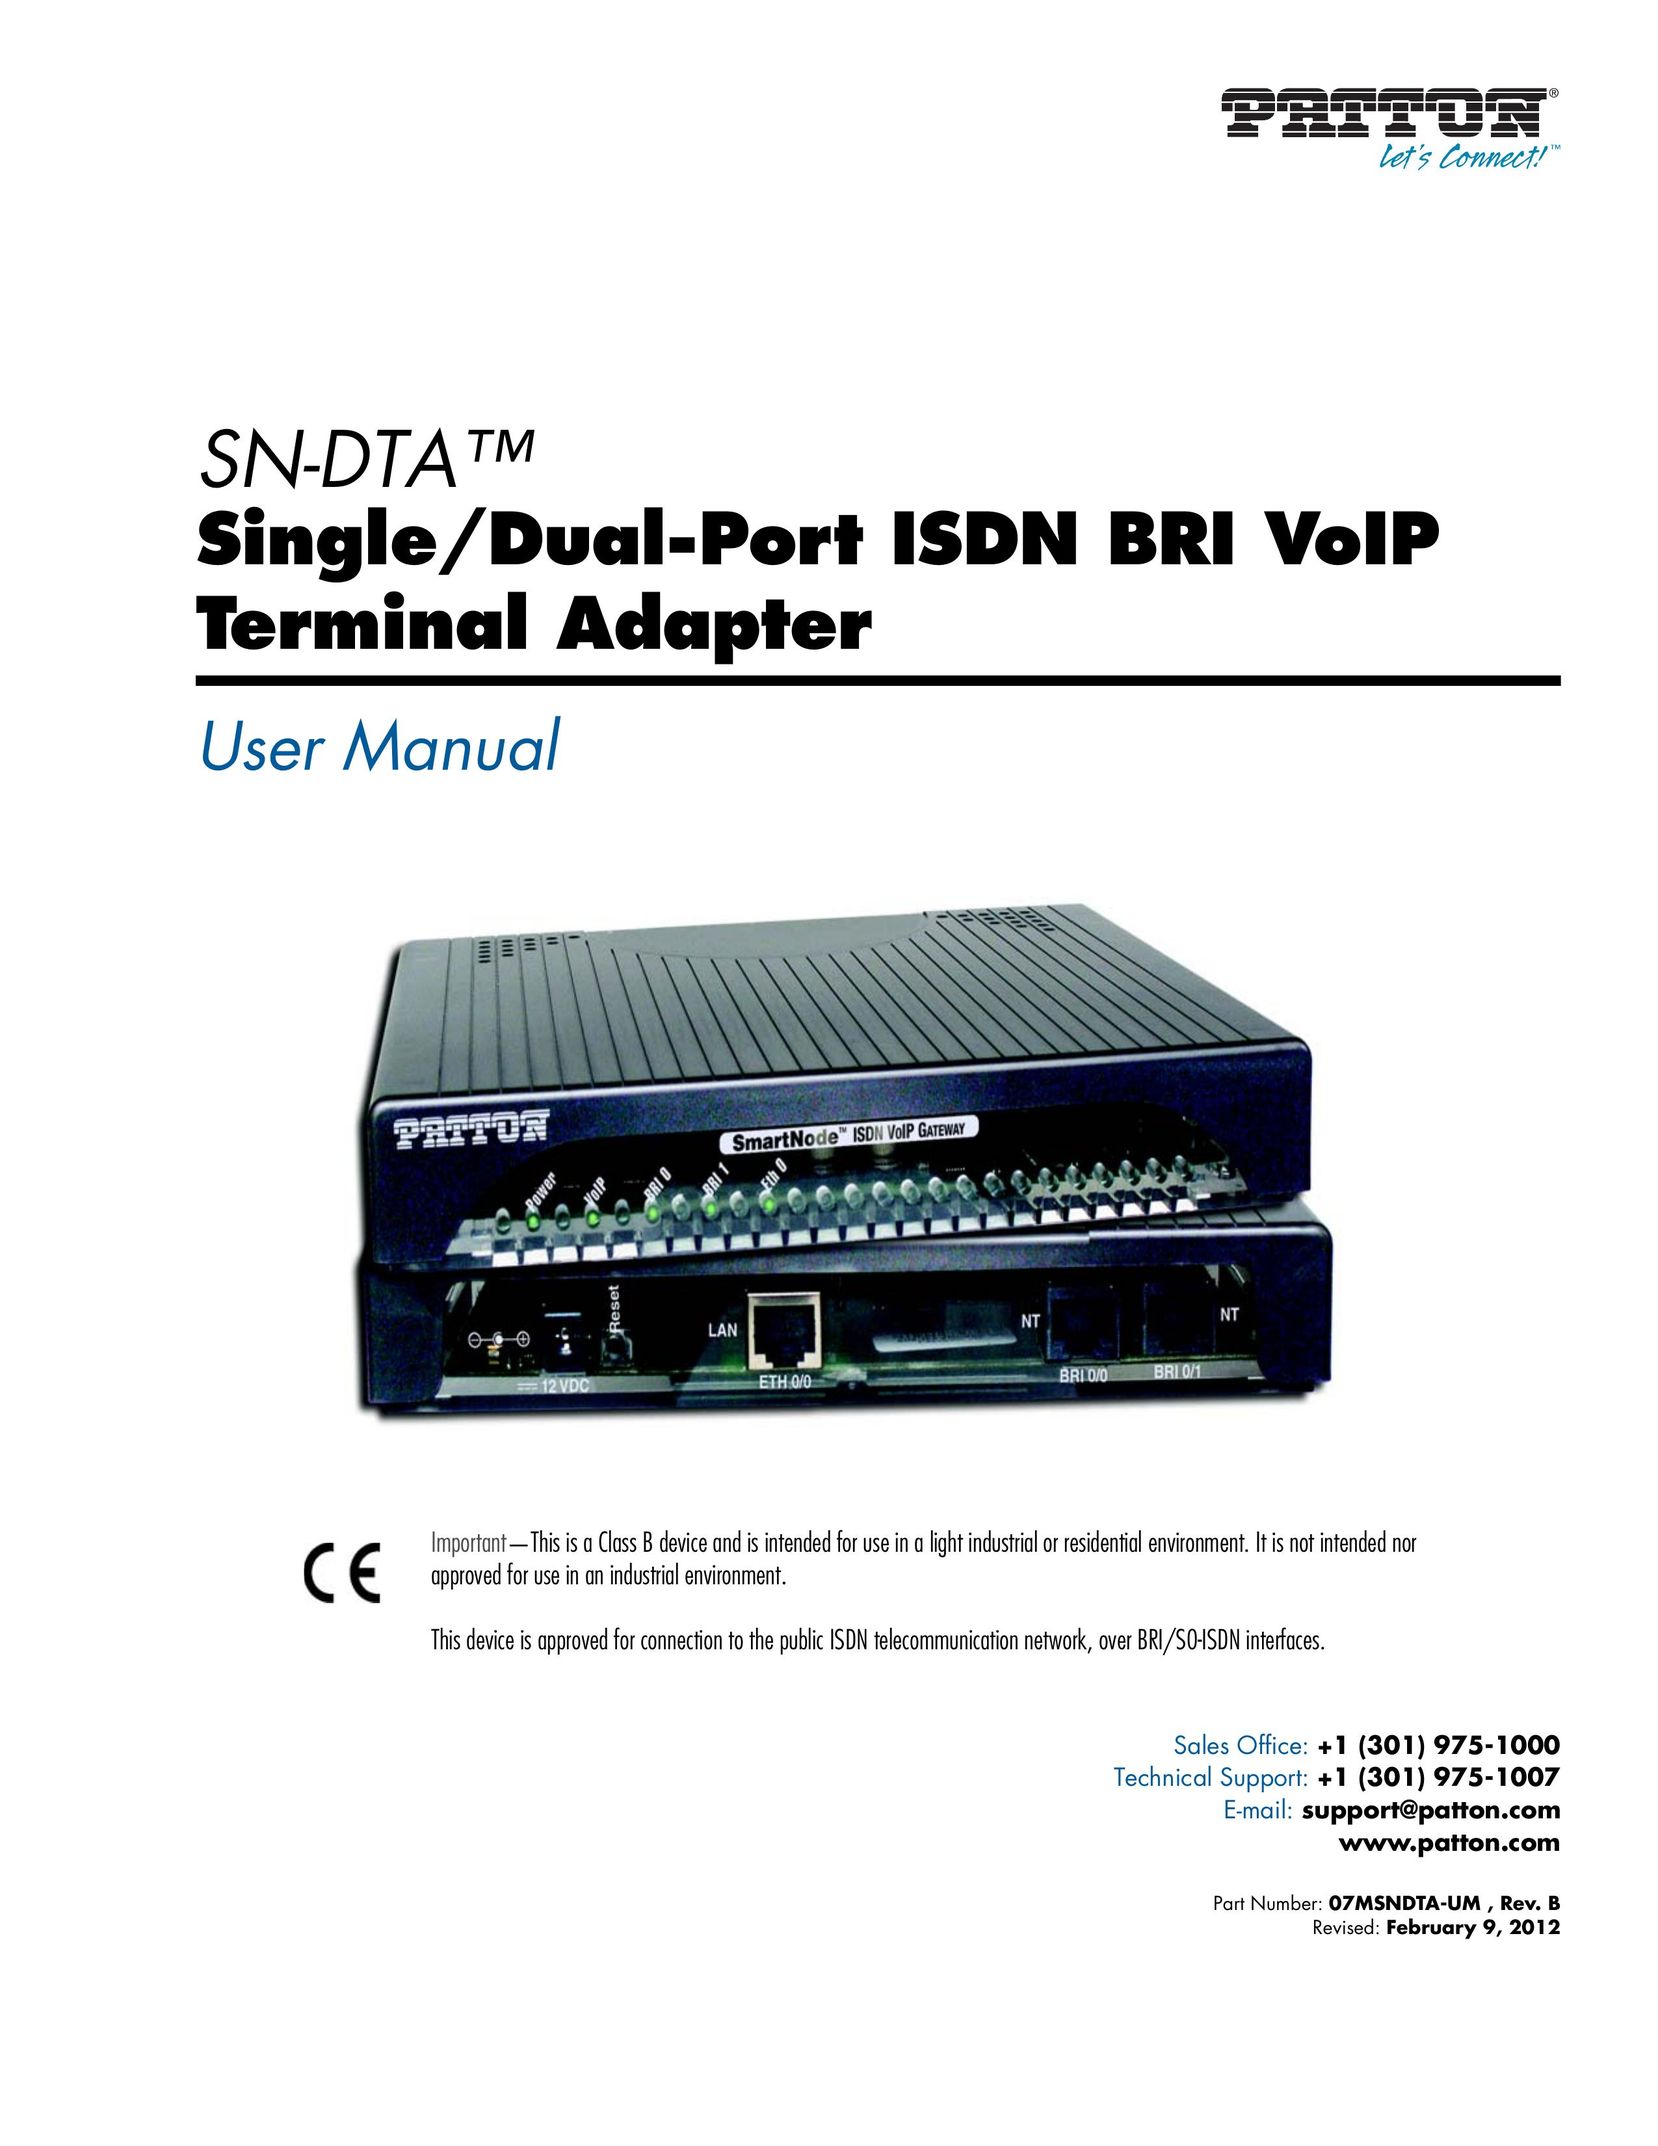 Patton electronic SN-DTA Network Cables User Manual